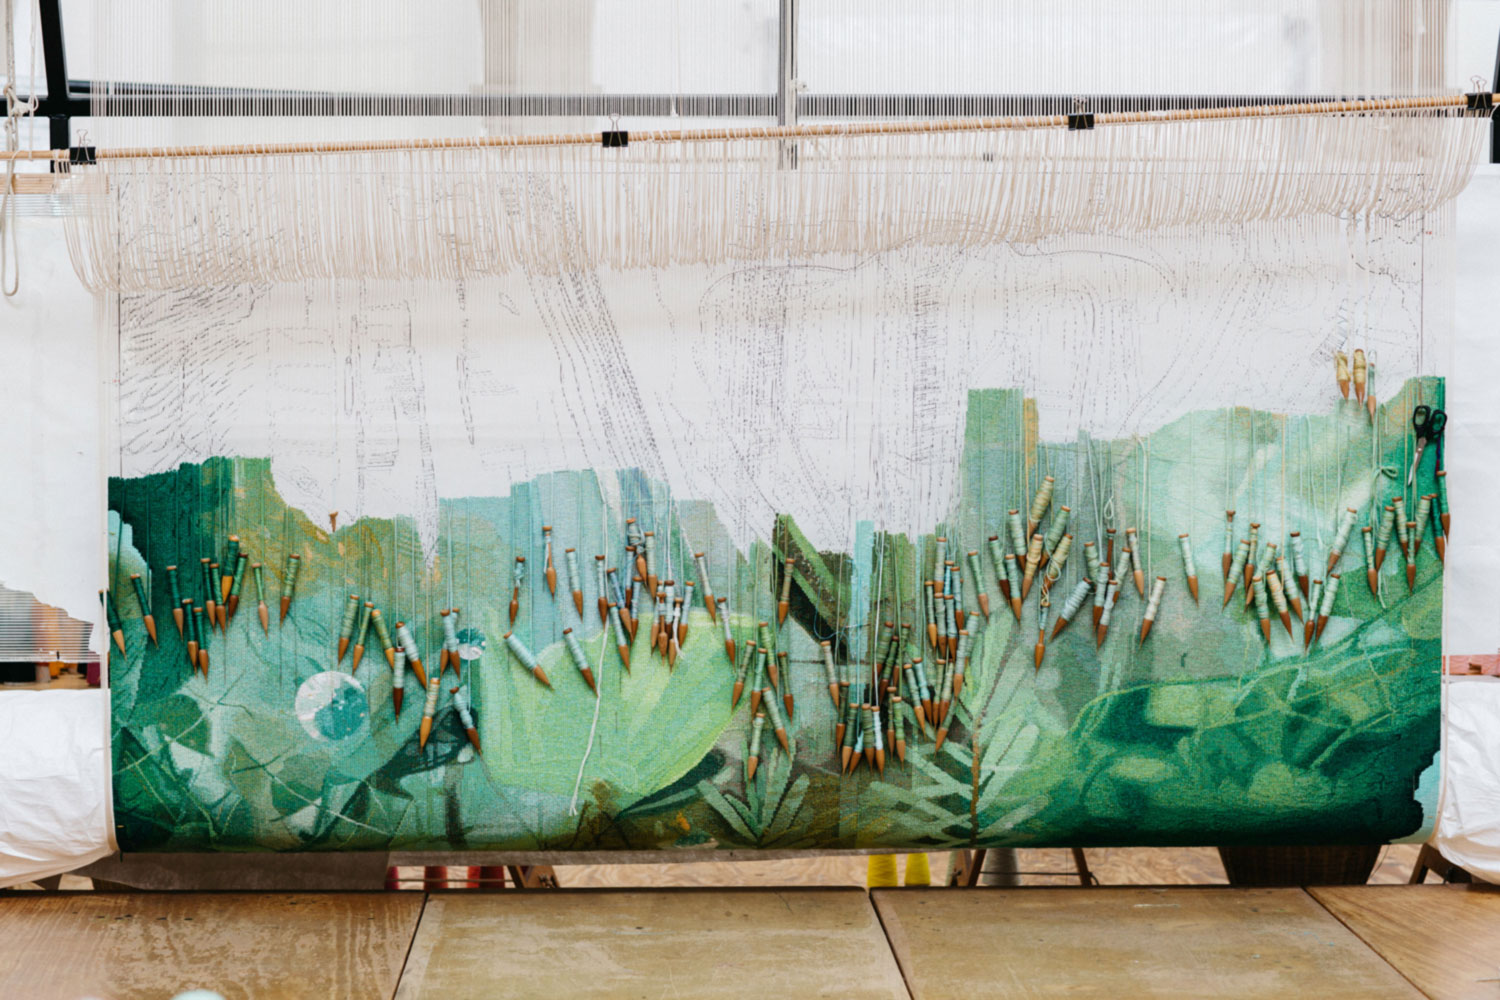 Tapestry in progress: ‘Hear the Plant Song’ 2020, Janet Laurence, woven by Chris Cochius, Amy Cornall, Cheryl Thornton, Sue Batten, wool, cotton, 1.56 x 2.7m. Photo: Marie-Luise Skibbe.